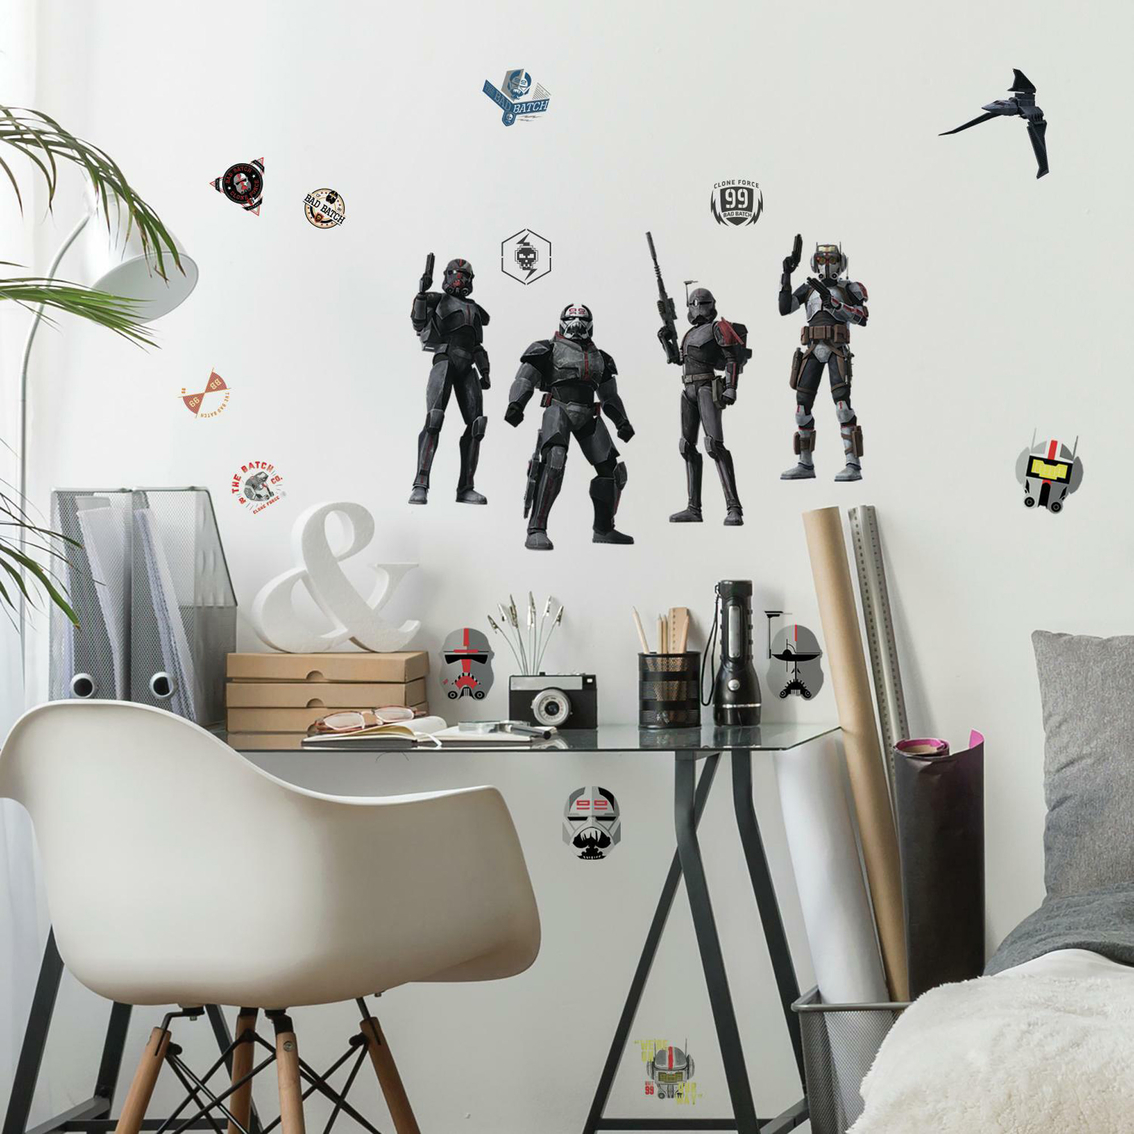 RoomMates Star Wars The Bad Batch Peel and Stick Wall Decals - Image 2 of 5